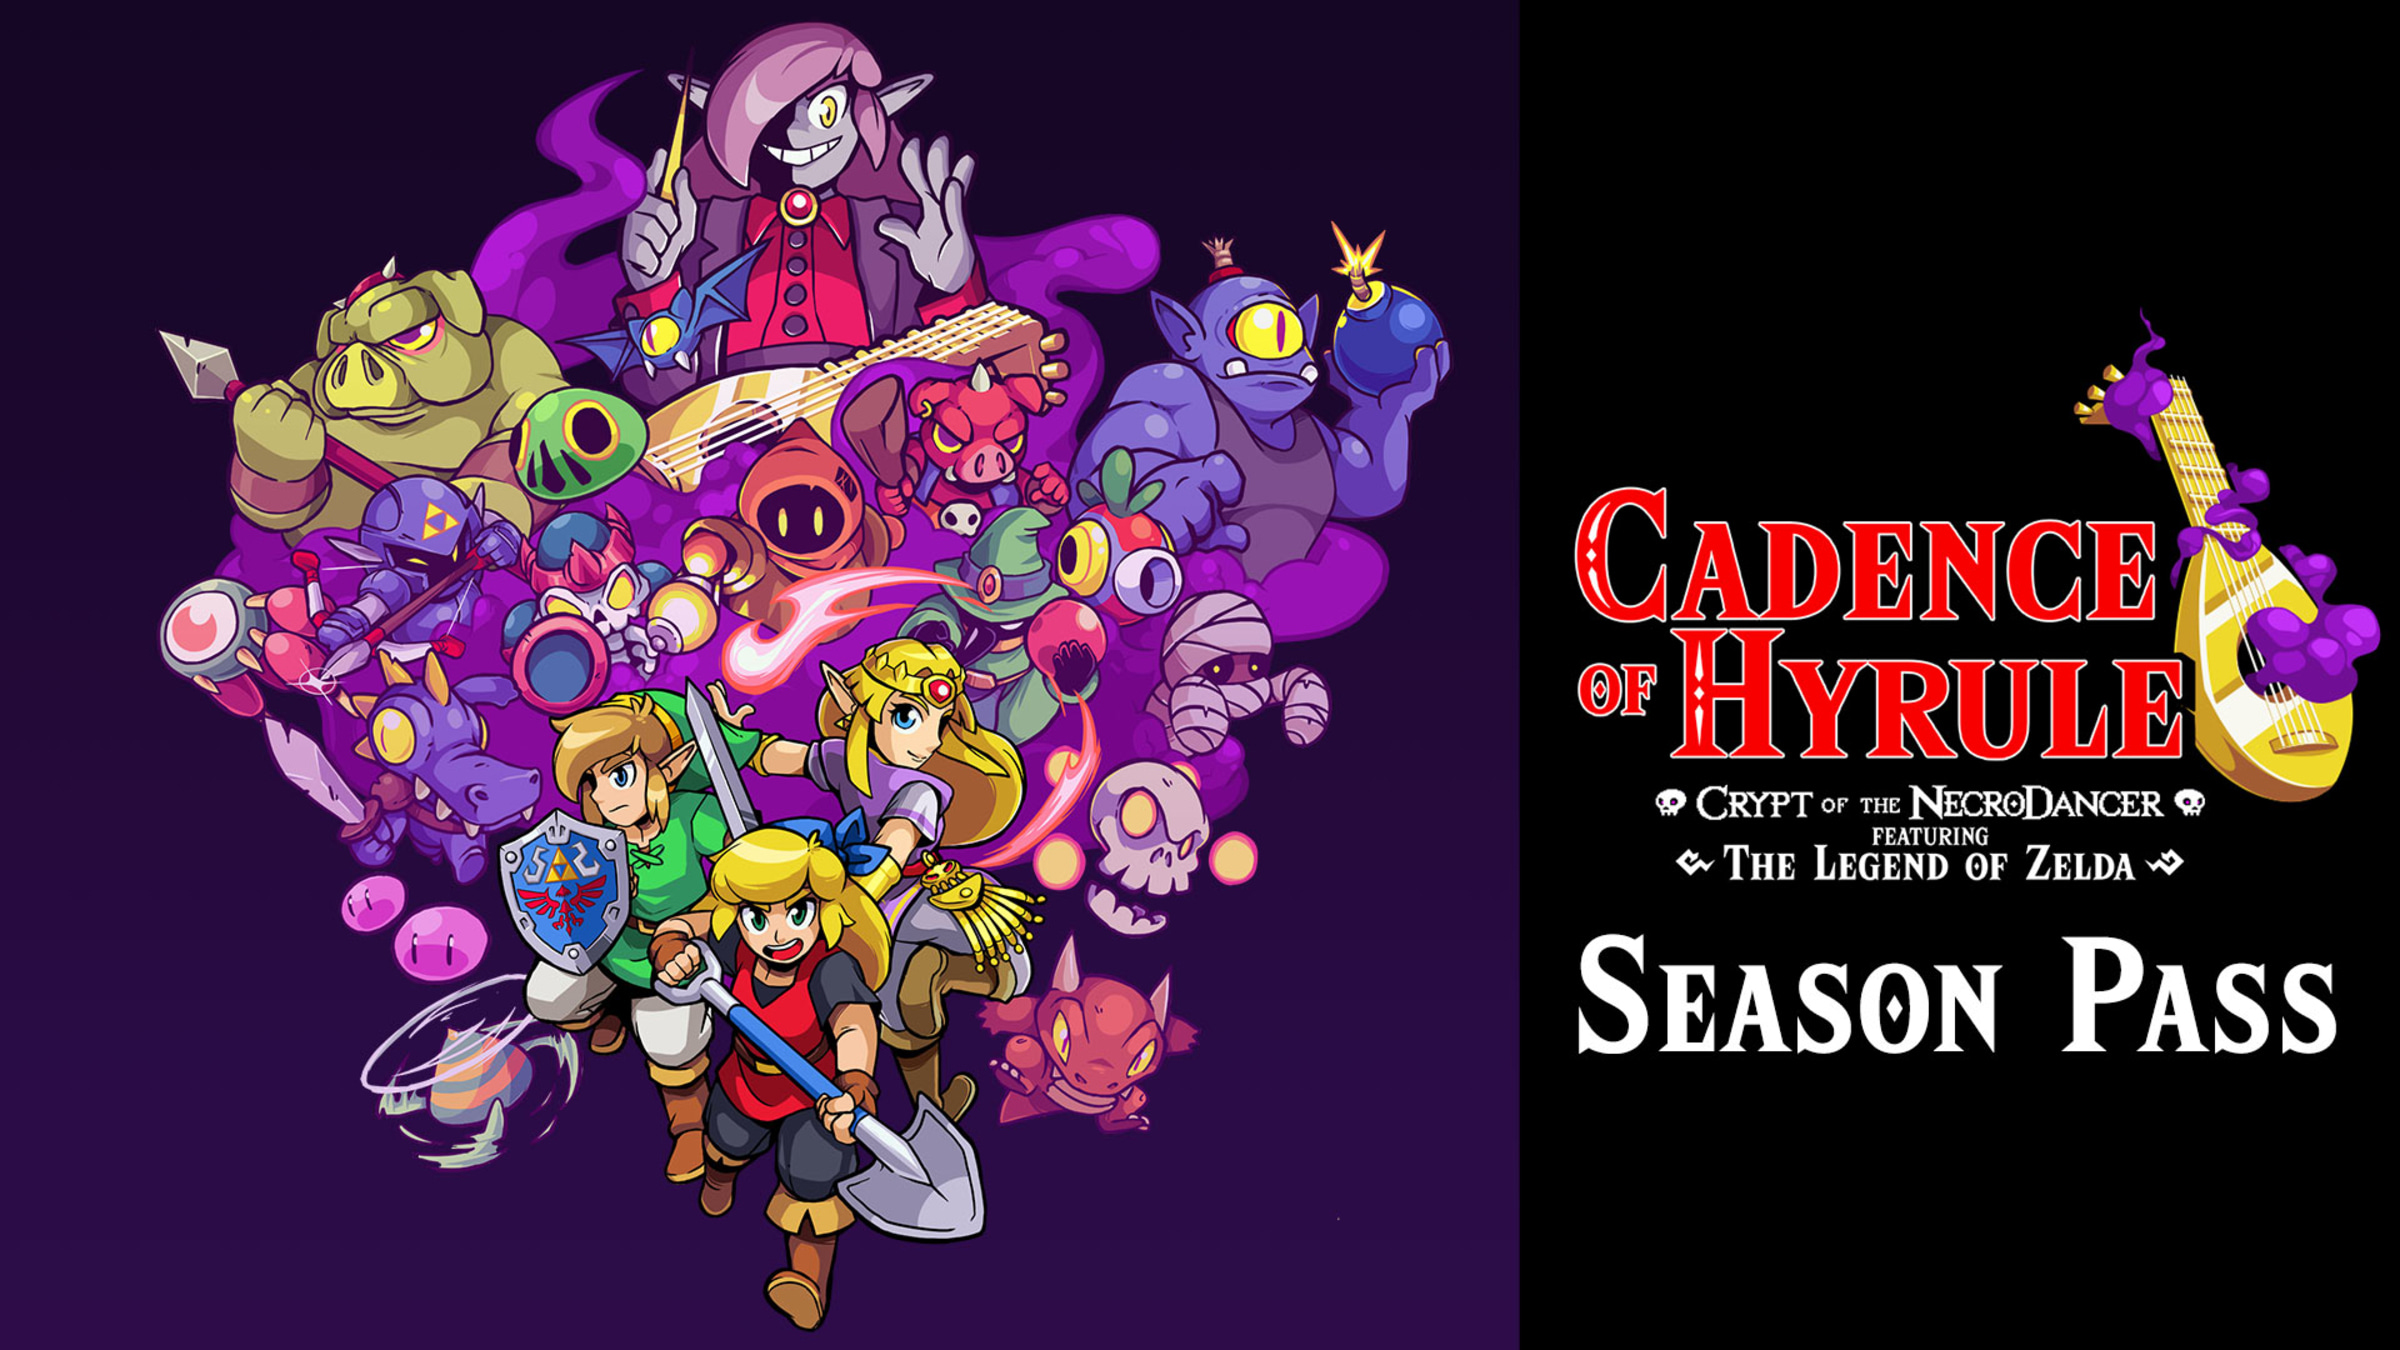 Cadence Season Nintendo Switch Pass of Site Official Nintendo for - Hyrule